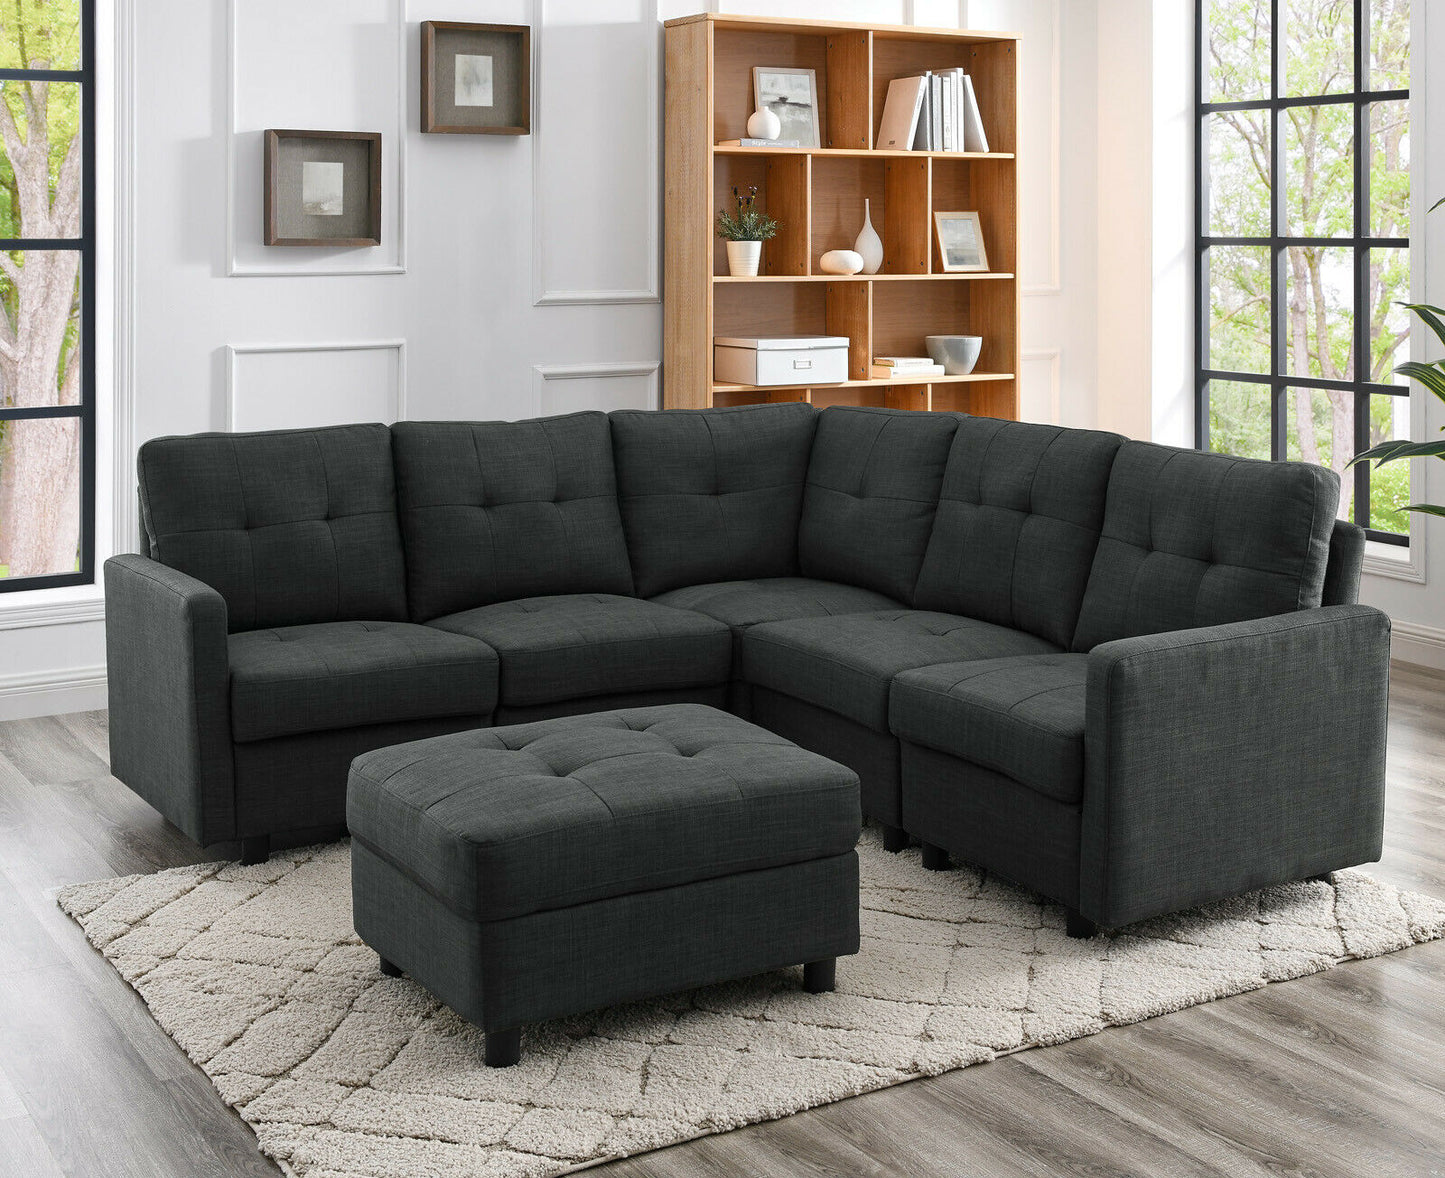 Sectional Sofa Set - Modern Linen Build Your Own Sofa with Reversible Chaise - L-Shaped Couch - L-Shaped Sofa Set